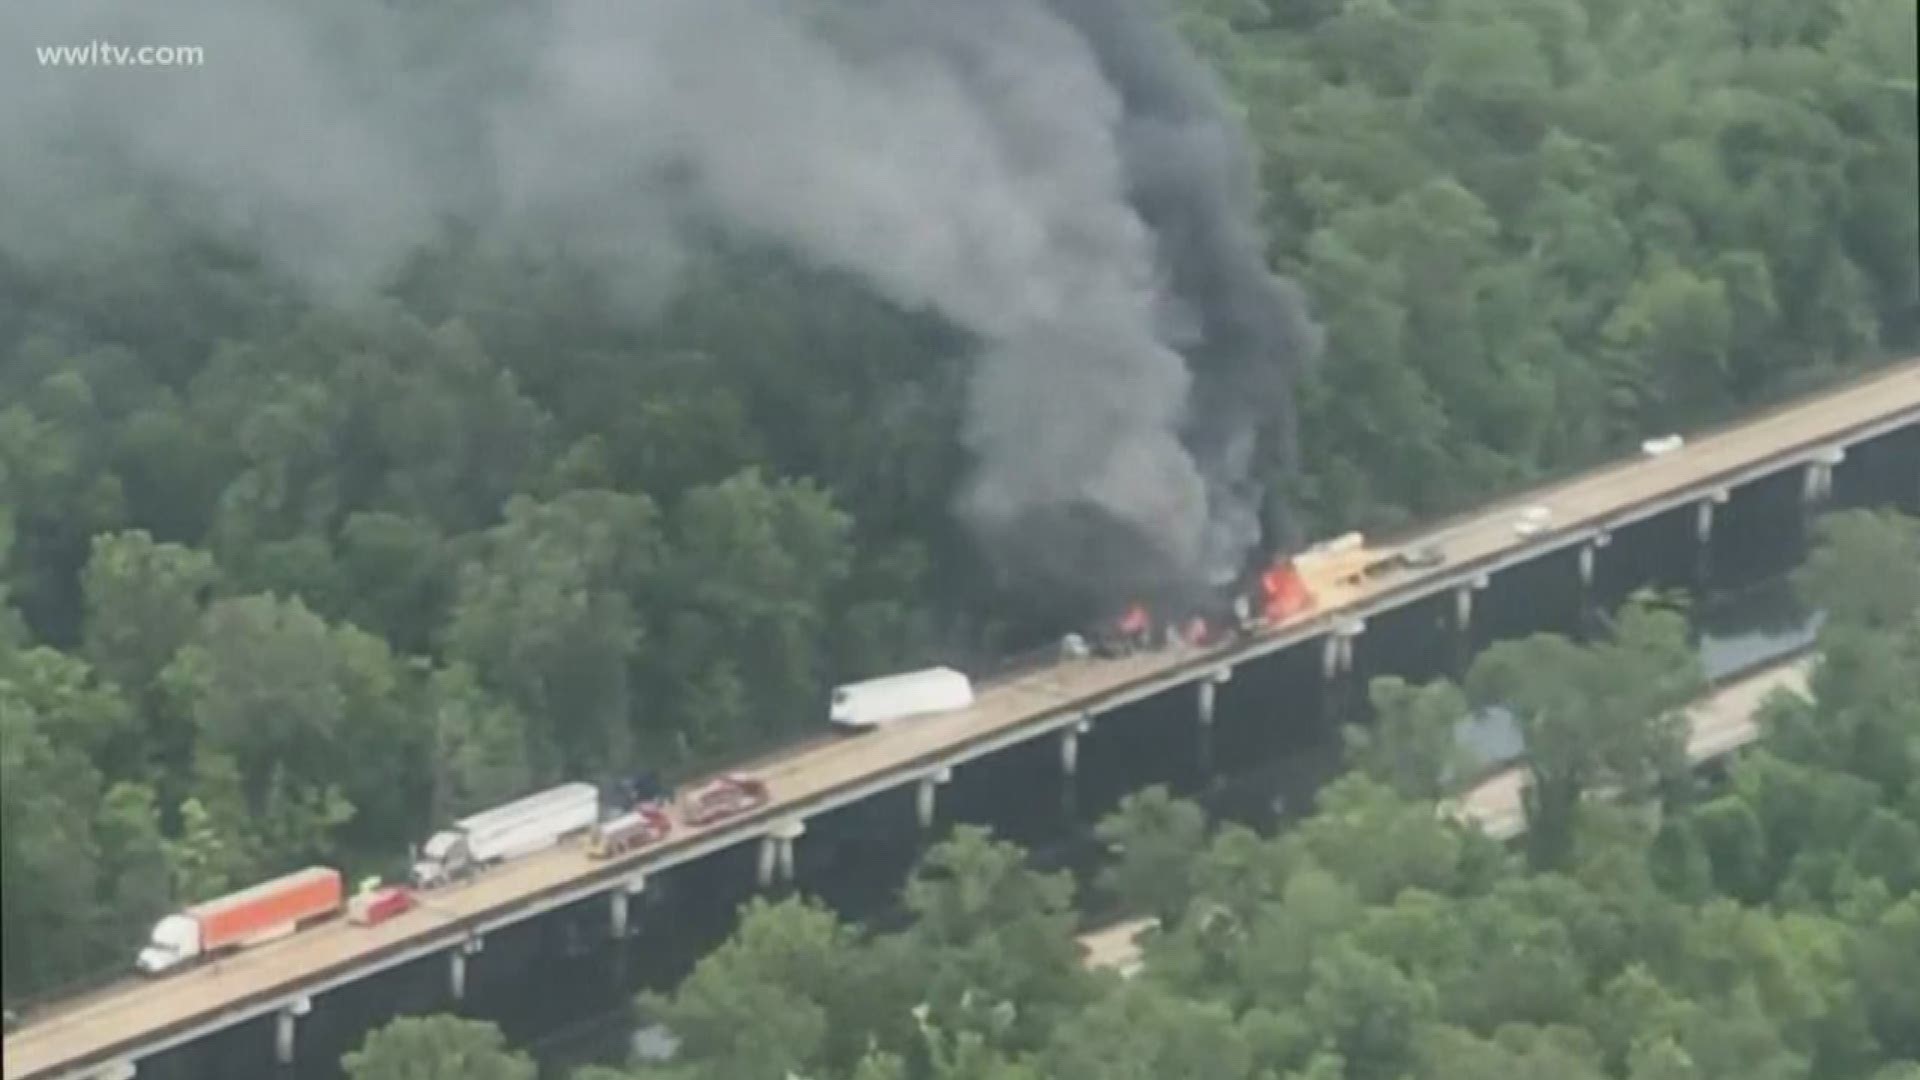 Police found the burned remains of one person after extinguishing a massive fire that spread through multiple semi-trucks on I-10 Westbound on the Basin Bridge.